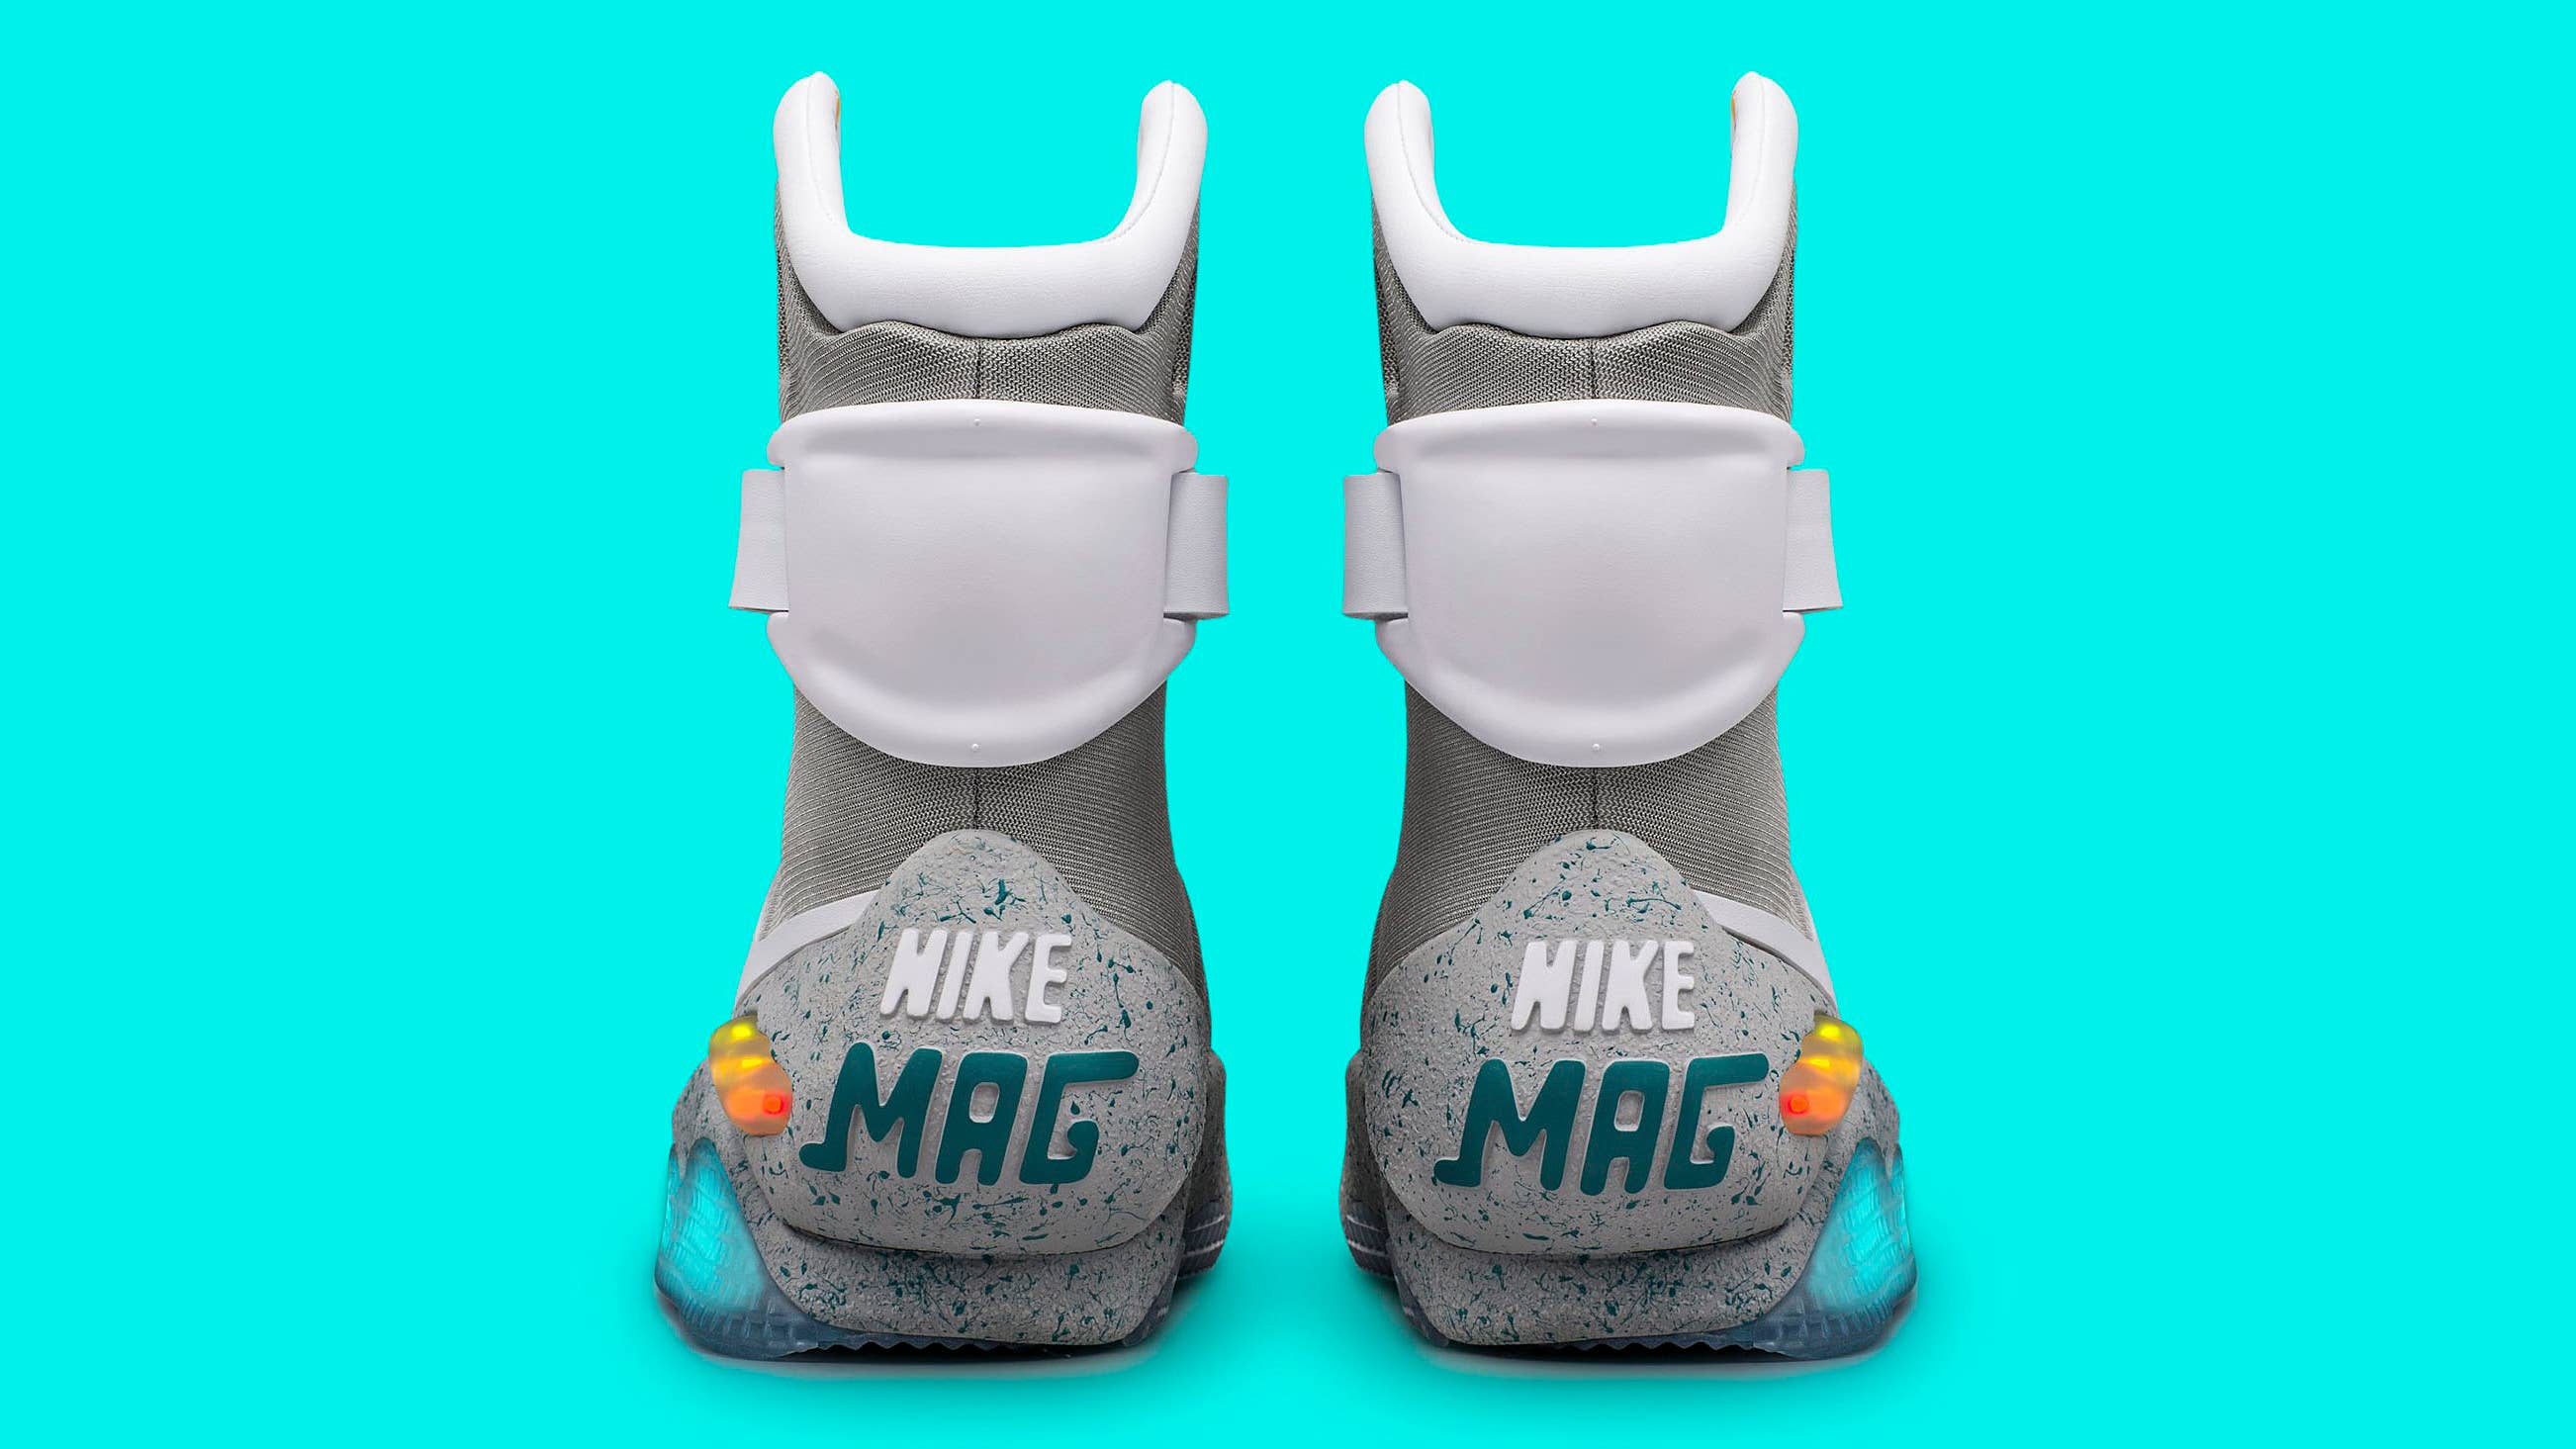 The Complete Nike Mag Price | Complex